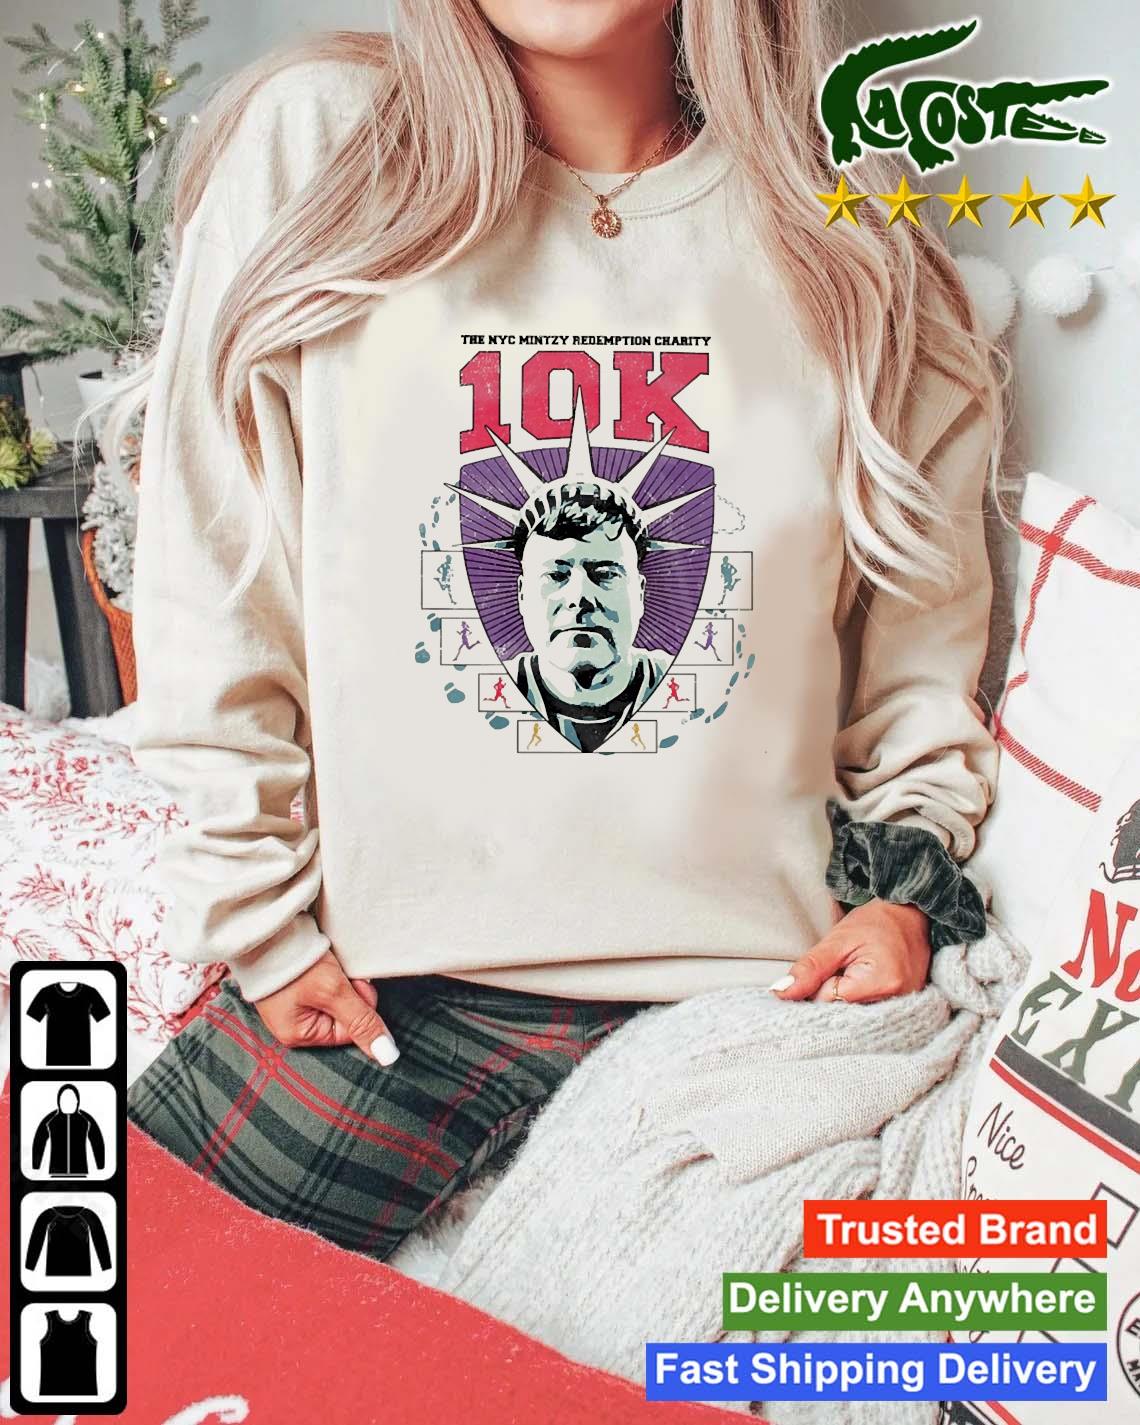 The Nyc Mintzy Redemption Charity 10k Sweats Mockup Sweater